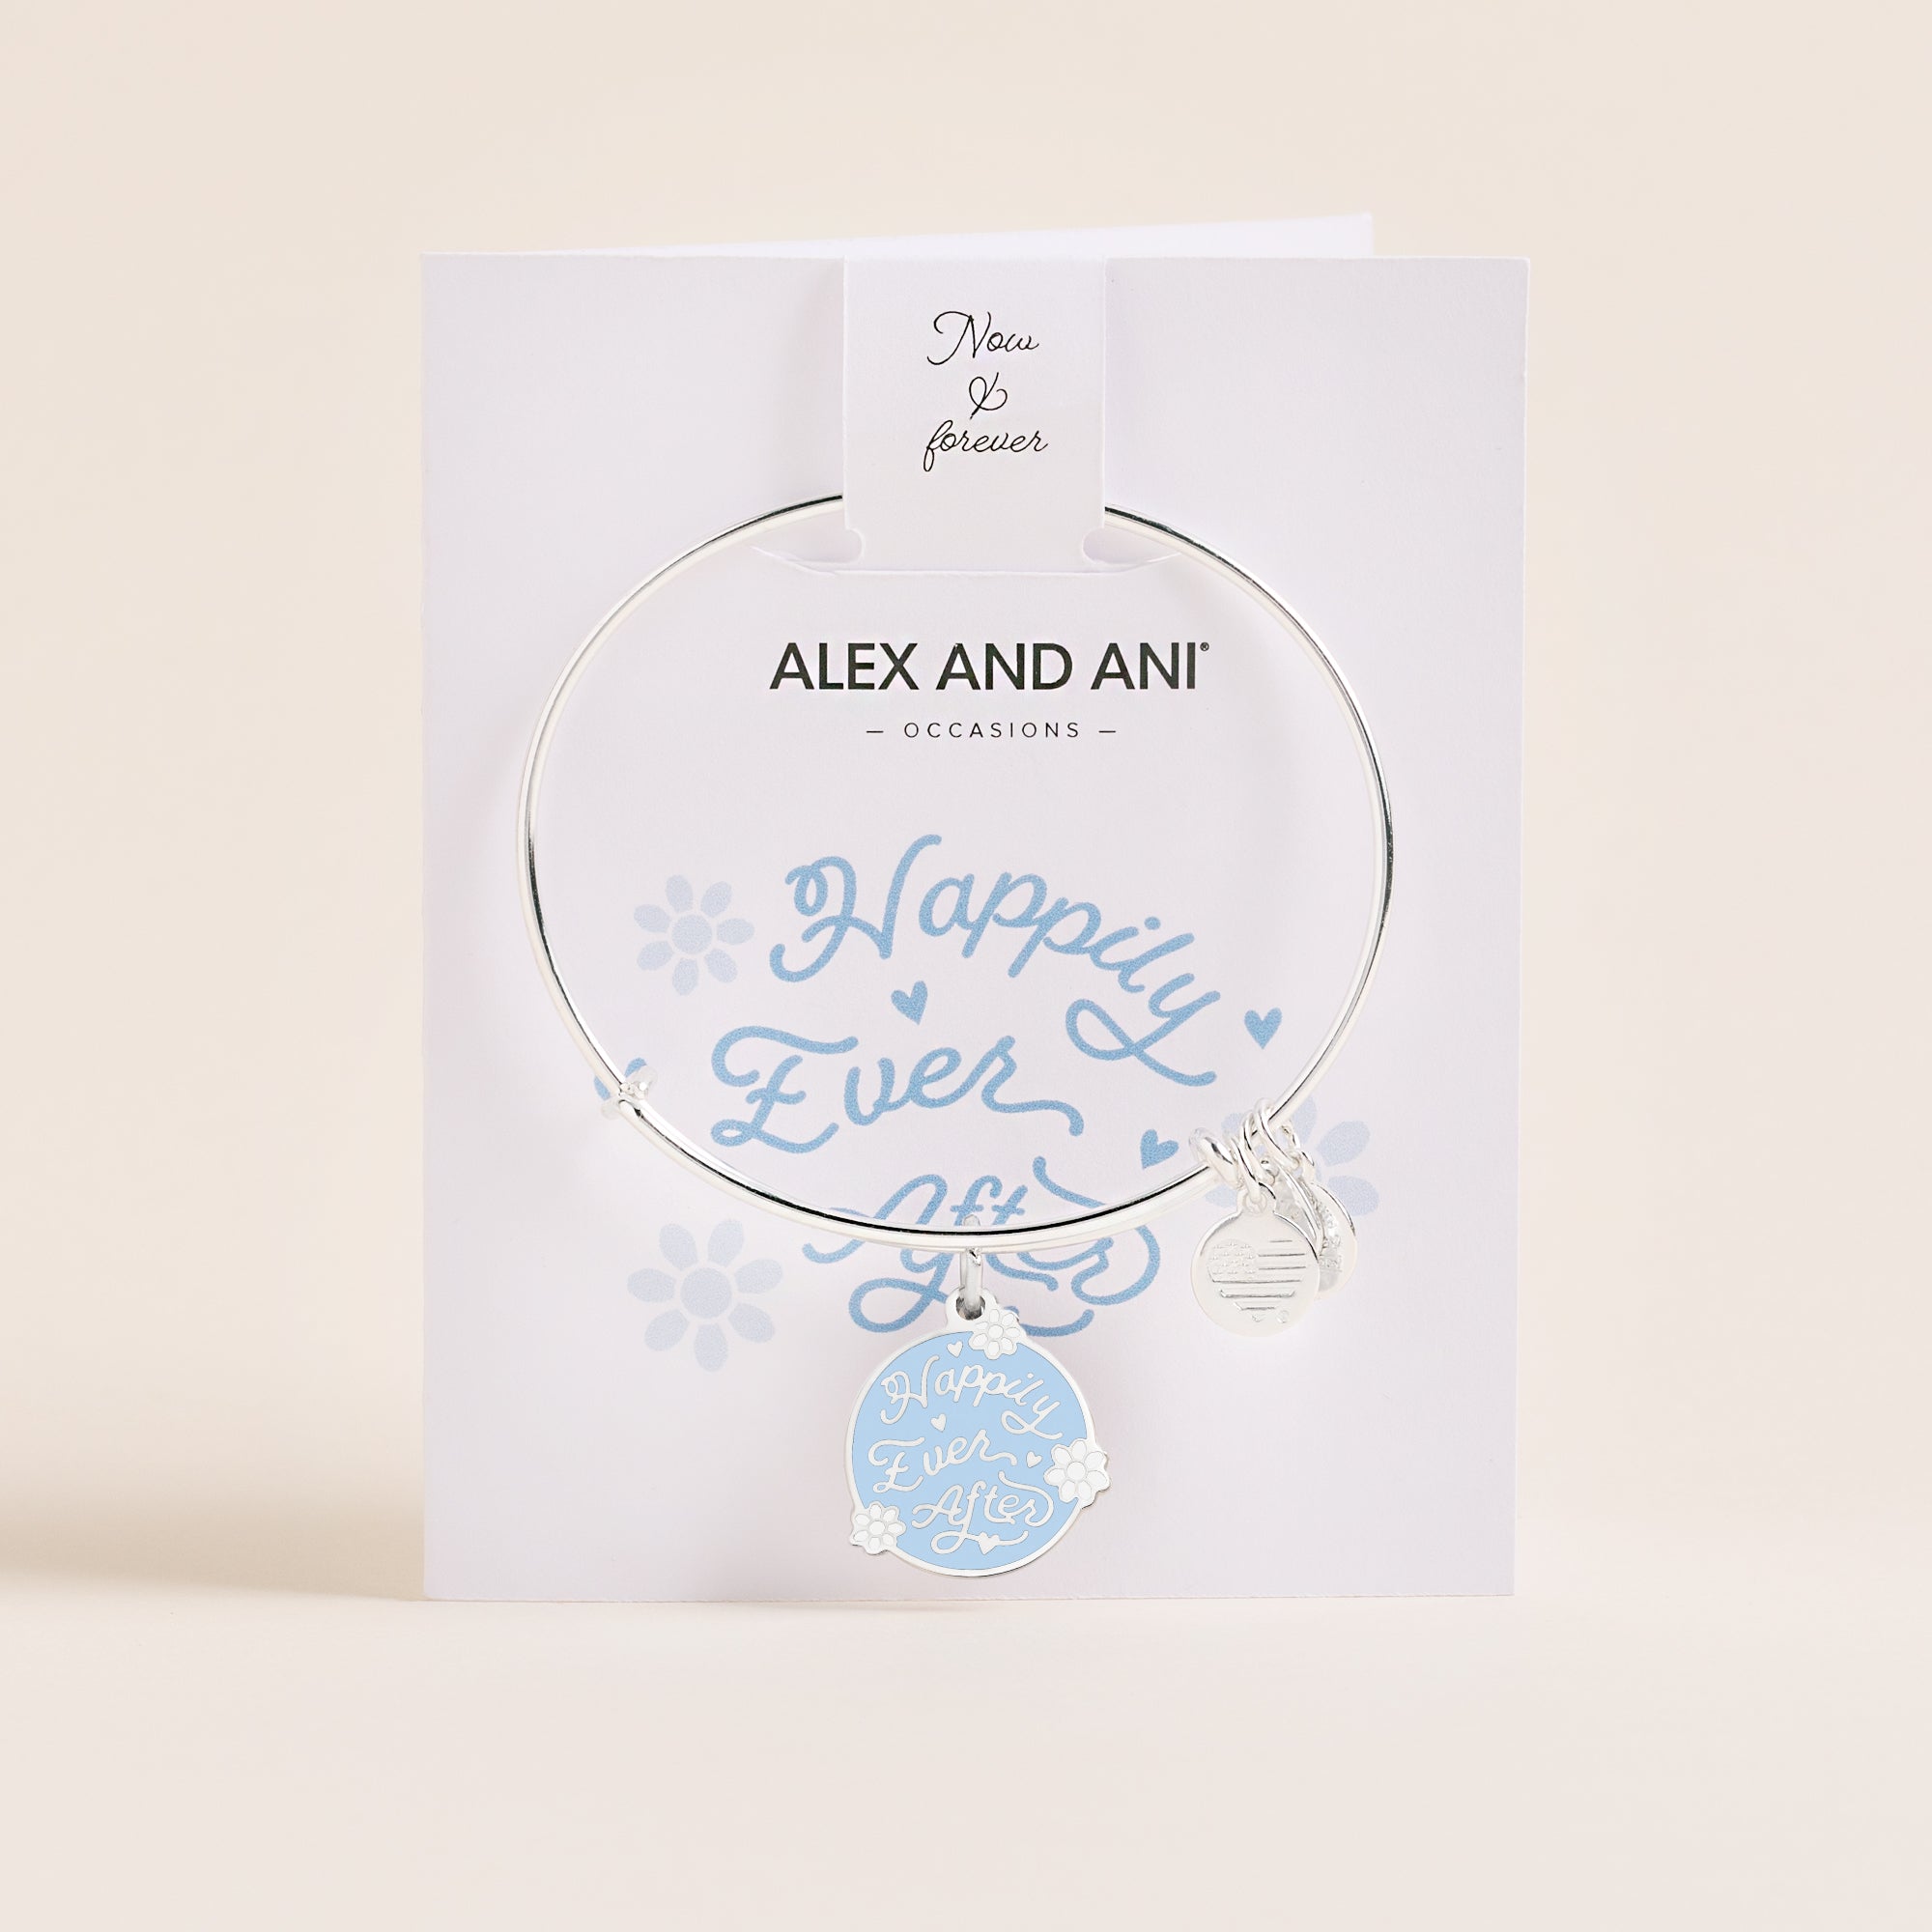 Happily Ever After Charm Bangle - Alex and Ani – ALEX AND ANI